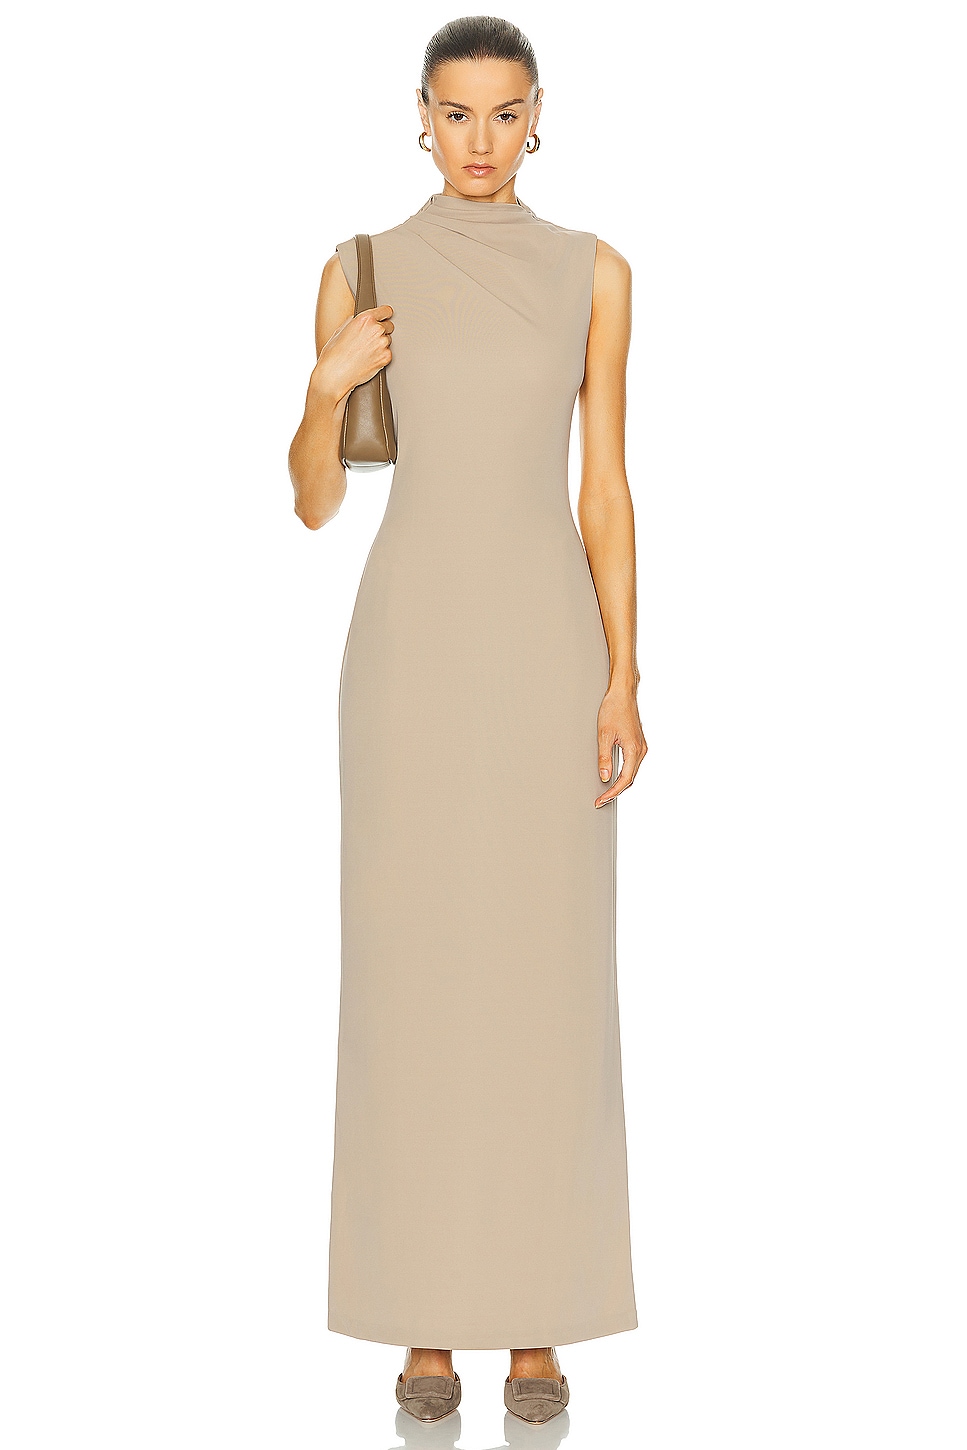 Image 1 of L'Academie by Marianna Ciana Maxi Dress in Beige